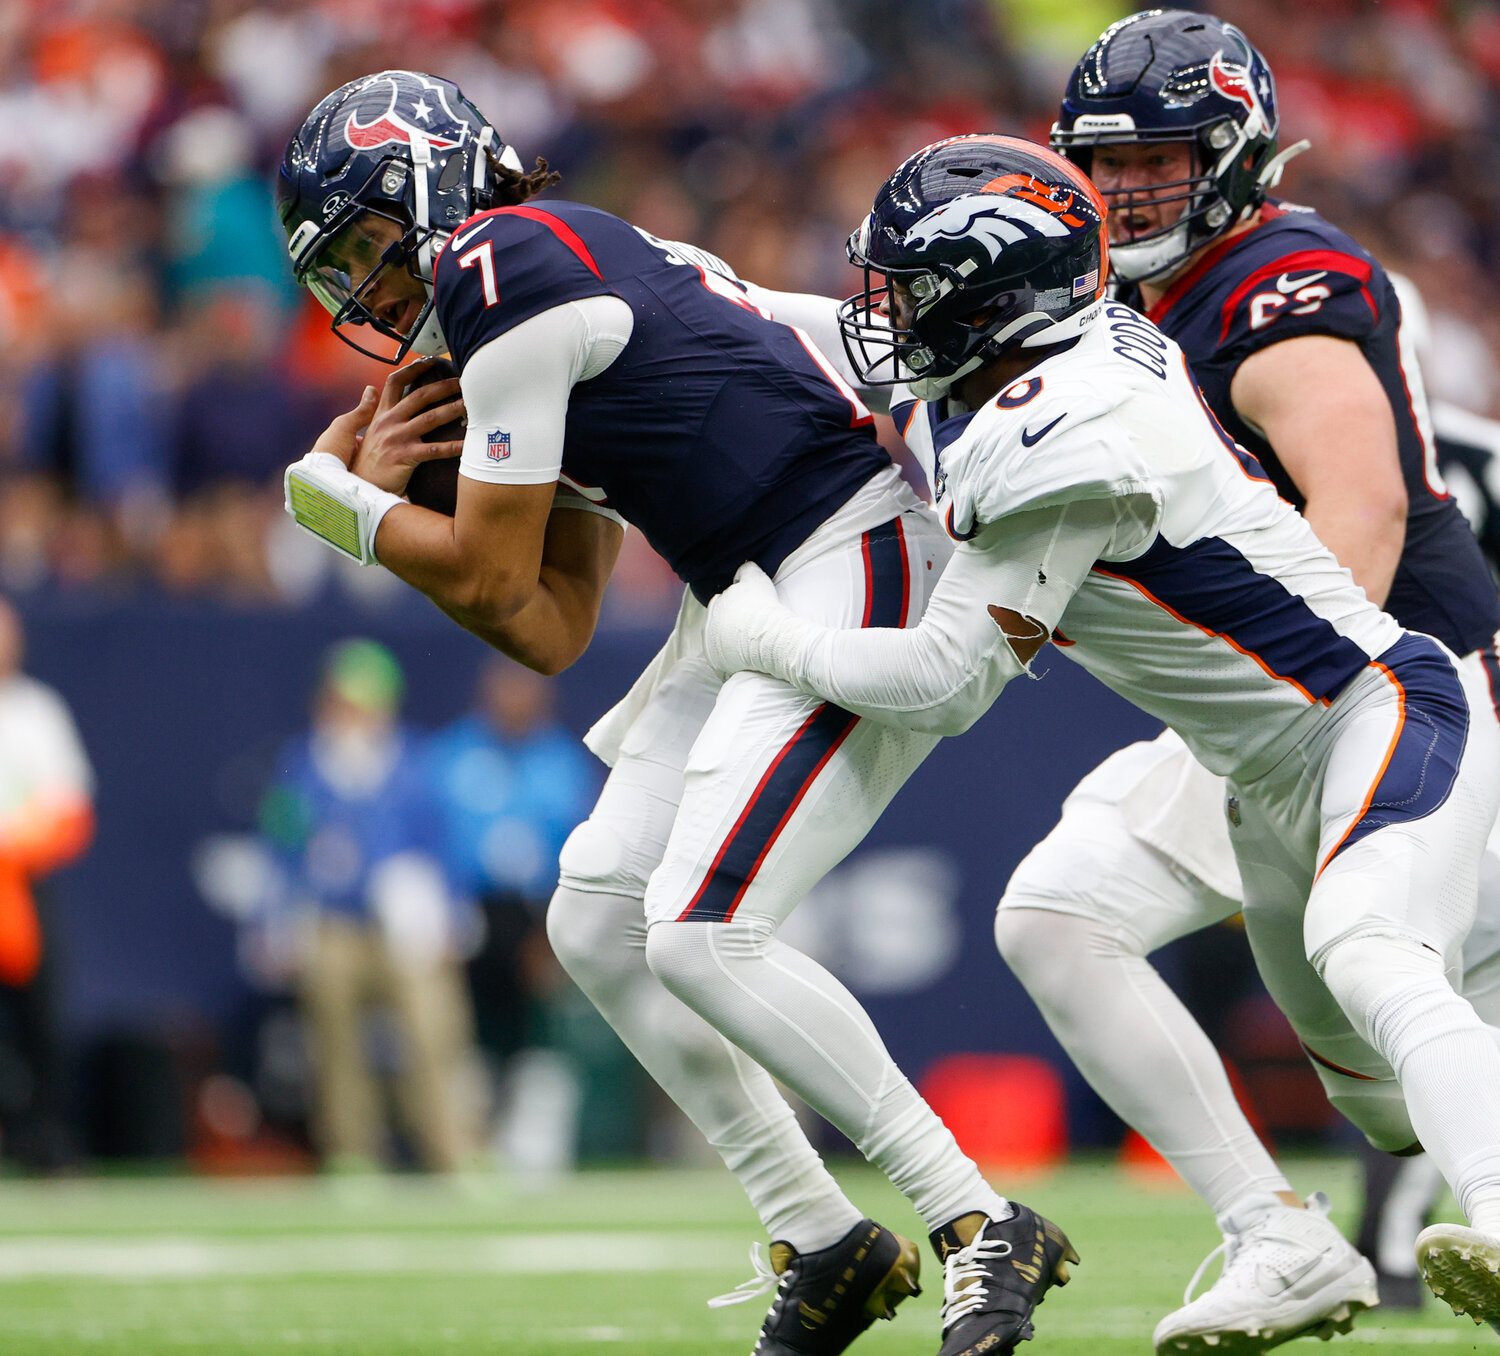 Texans quarterback C.J. Stroud (7) is tackled by Broncos linebacker Jonathon Cooper (0) during an NFL game between the Texans and the Broncos on December 3, 2023 in Houston. The Texans won, 22-17.